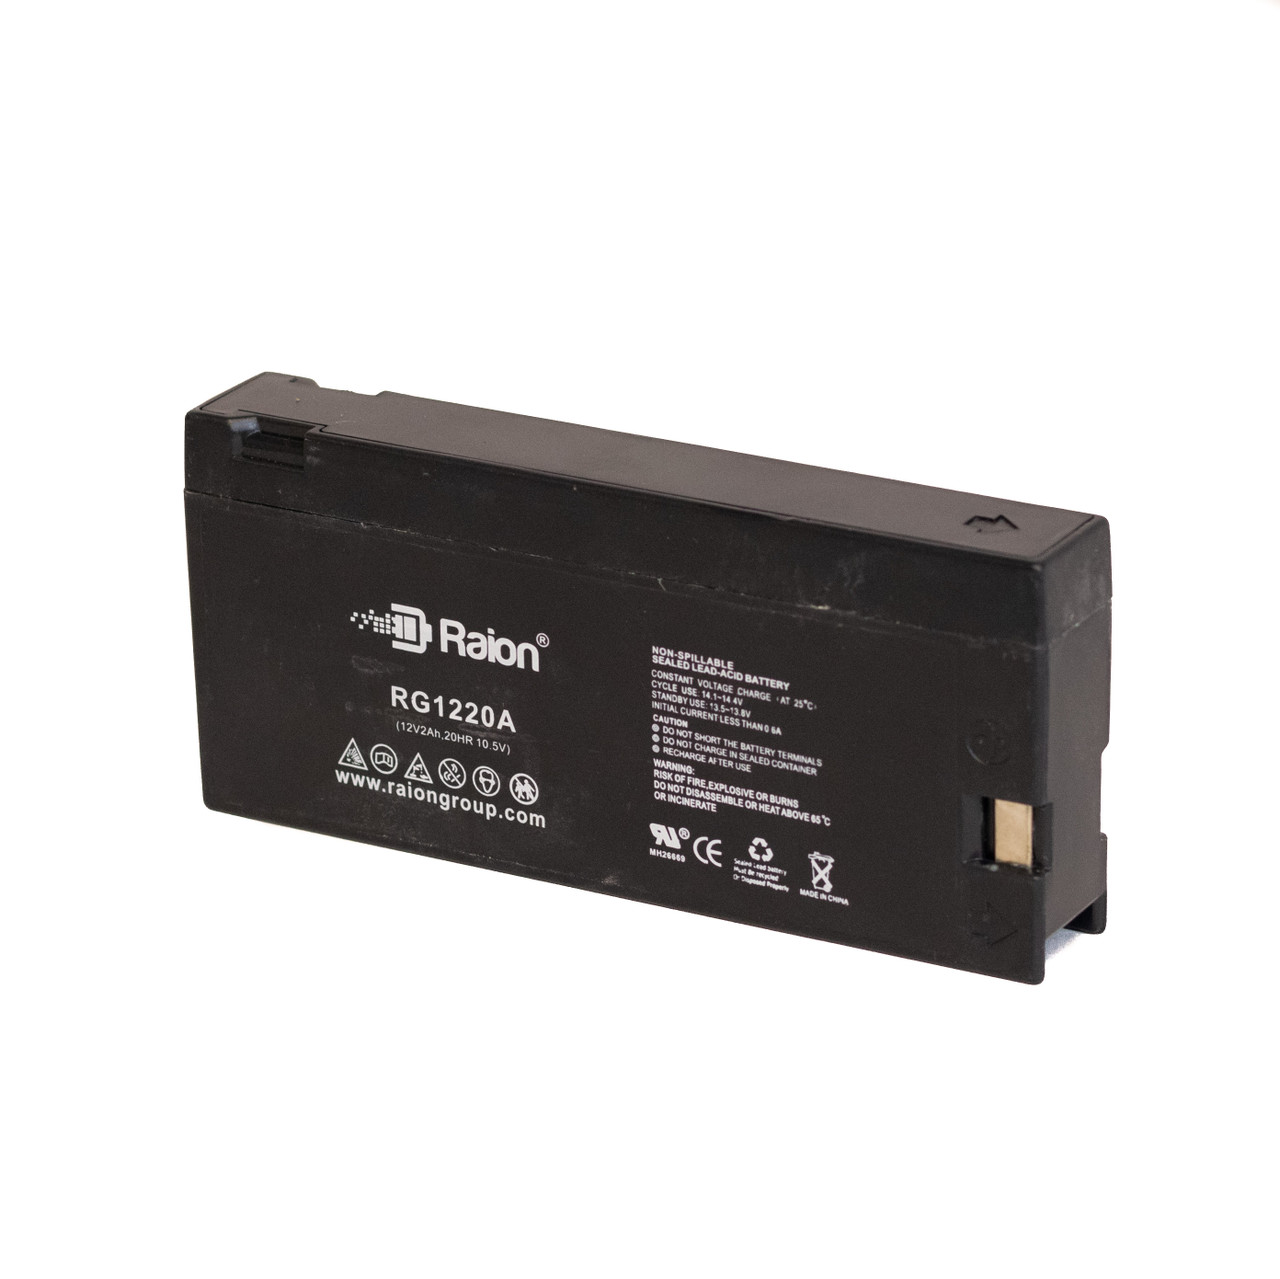 Raion Power RG1220A Replacement Battery for Colin Medical Instruments Press-Mate Advantage